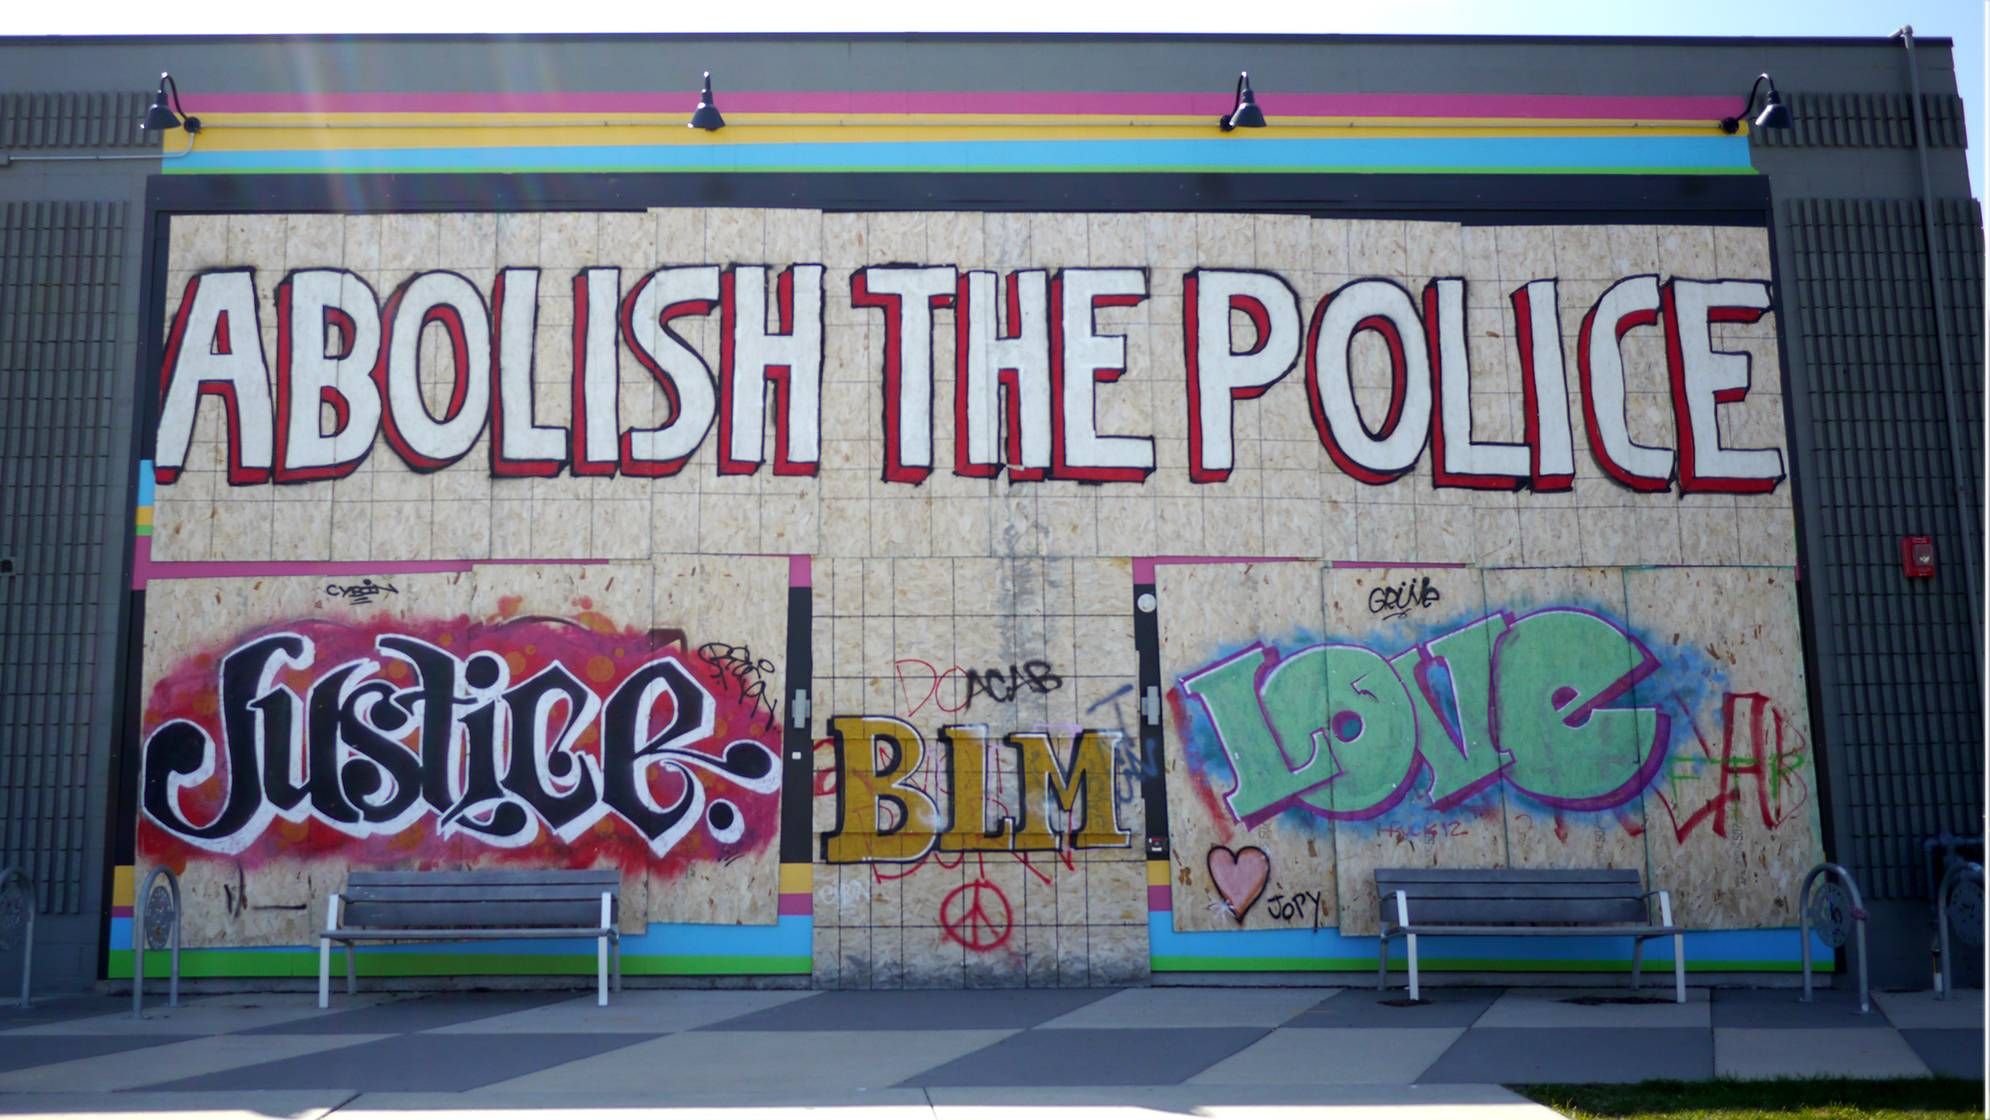 A mural with "Abolish the Police" painted in large block letters on plywood.